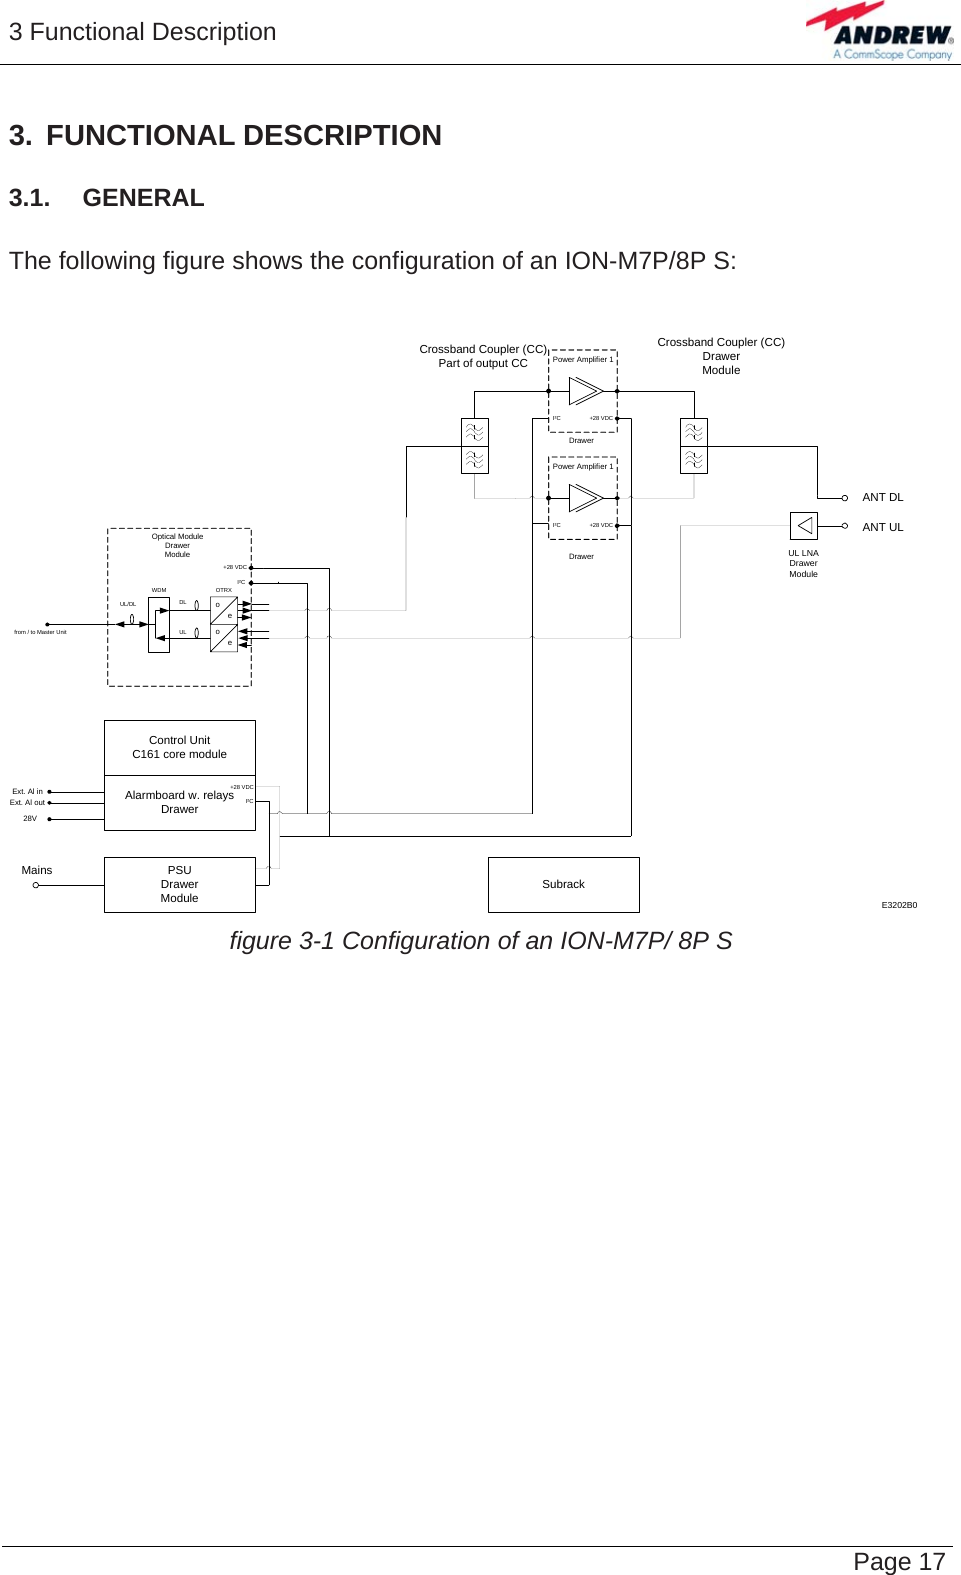 3 Functional Description   Page 173. FUNCTIONAL DESCRIPTION 3.1.  GENERAL  The following figure shows the configuration of an ION-M7P/8P S:   Power Amplifier 1+28 VDCI²CoeoeDLULUL/DLWDM OTRXfrom / to Master UnitOptical Module DrawerModule+28 VDCI²CPower Amplifier 1+28 VDCI²CControl UnitC161 core moduleAlarmboard w. relaysDrawerPSUDrawerModuleMains+28 VDCI²CANT DLUL LNADrawerModule Ext. Al inExt. Al out28V E3202B0Crossband Coupler (CC)Part of output CCCrossband Coupler (CC)Drawer ModuleDrawer DrawerANT ULSubrack  figure 3-1 Configuration of an ION-M7P/ 8P S  